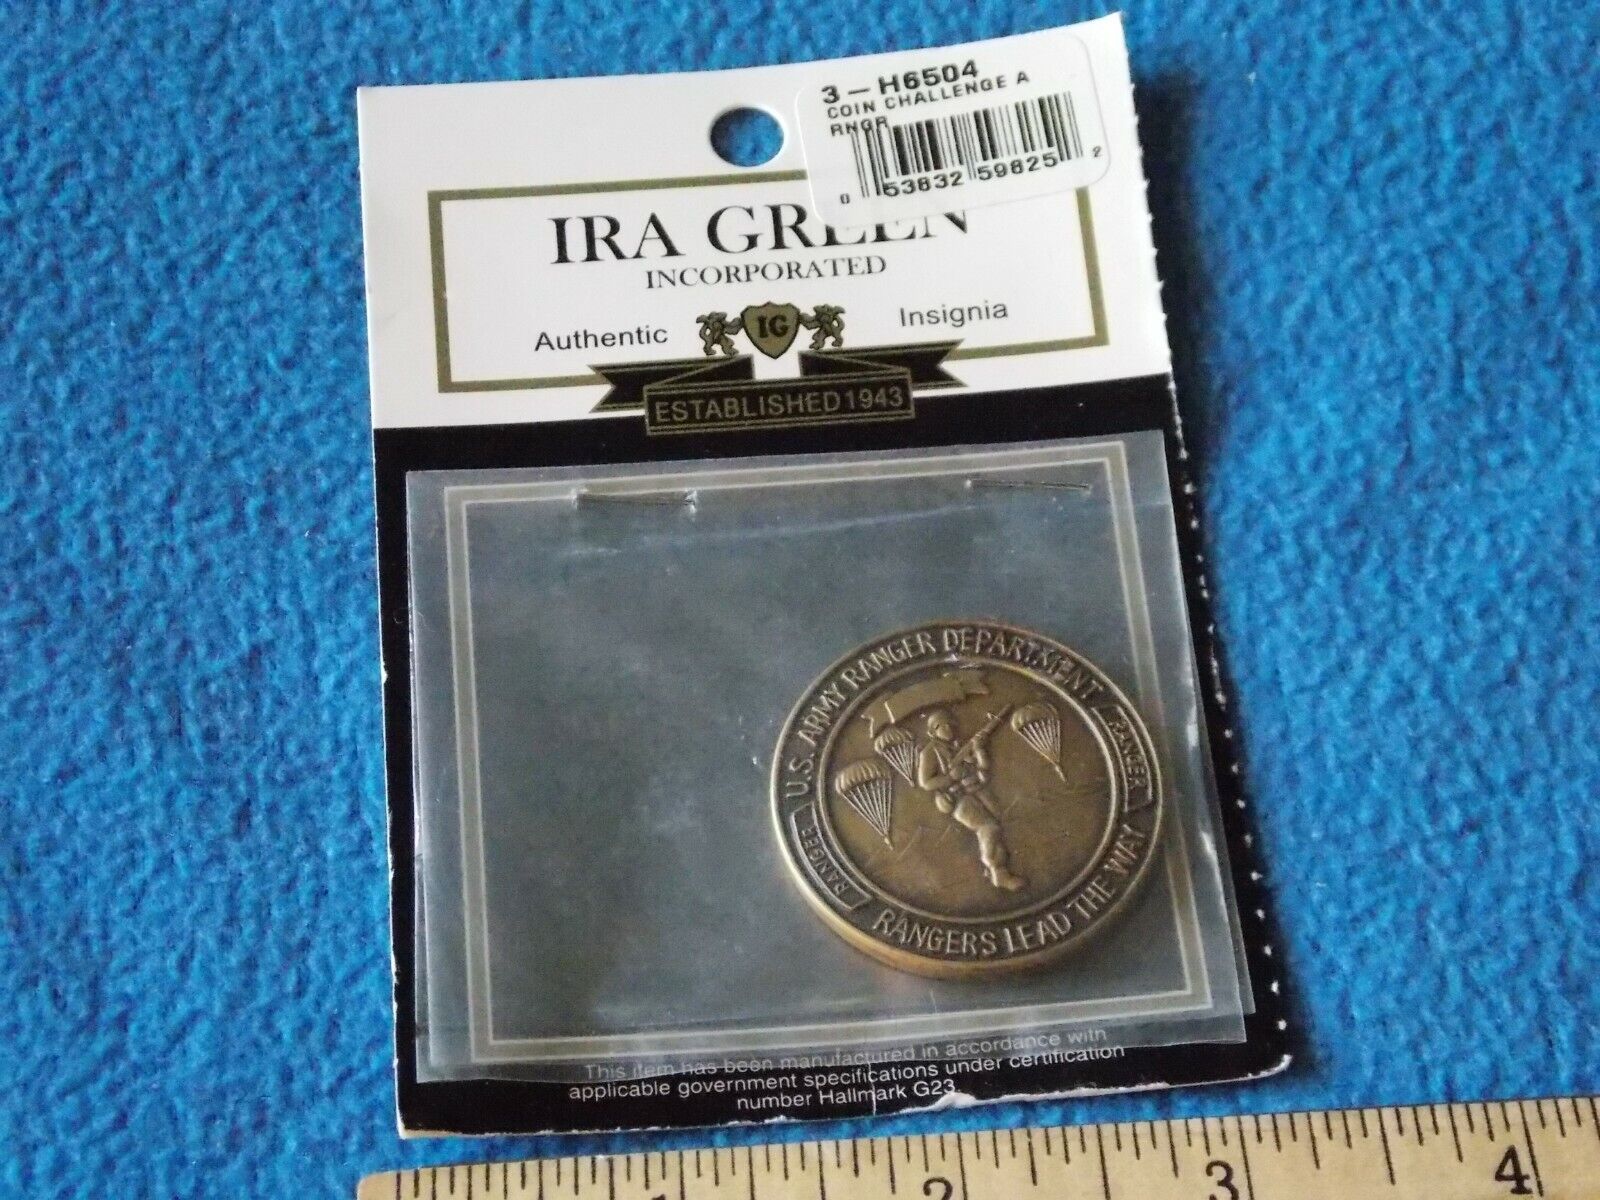 ARMY RANGER INFANTRY SCHOOL - FORT BENNING GEORGIA CHALLENGE COIN - ON CARD